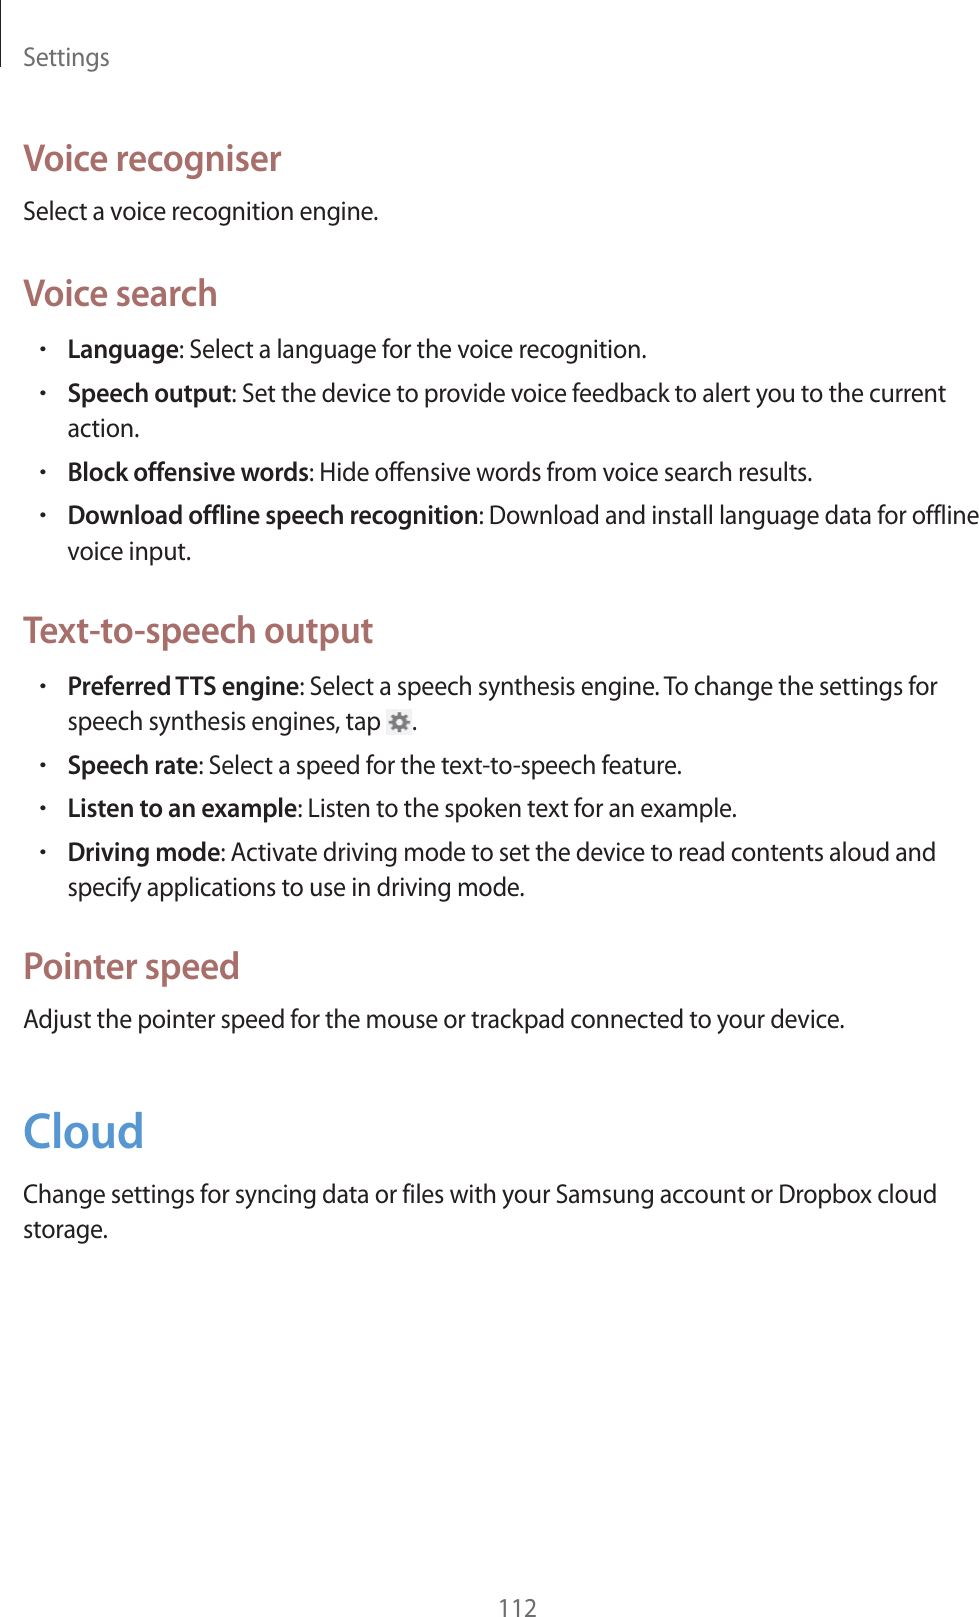 Settings112Voice recogniserSelect a voice recognition engine.Voice searchrLanguage: Select a language for the voice recognition.rSpeech output: Set the device to provide voice feedback to alert you to the current action.rBlock offensive words: Hide offensive words from voice search results.rDownload offline speech recognition: Download and install language data for offline voice input.Text-to-speech outputrPreferred TTS engine: Select a speech synthesis engine. To change the settings for speech synthesis engines, tap  .rSpeech rate: Select a speed for the text-to-speech feature.rListen to an example: Listen to the spoken text for an example.rDriving mode: Activate driving mode to set the device to read contents aloud and specify applications to use in driving mode.Pointer speedAdjust the pointer speed for the mouse or trackpad connected to your device.CloudChange settings for syncing data or files with your Samsung account or Dropbox cloud storage.